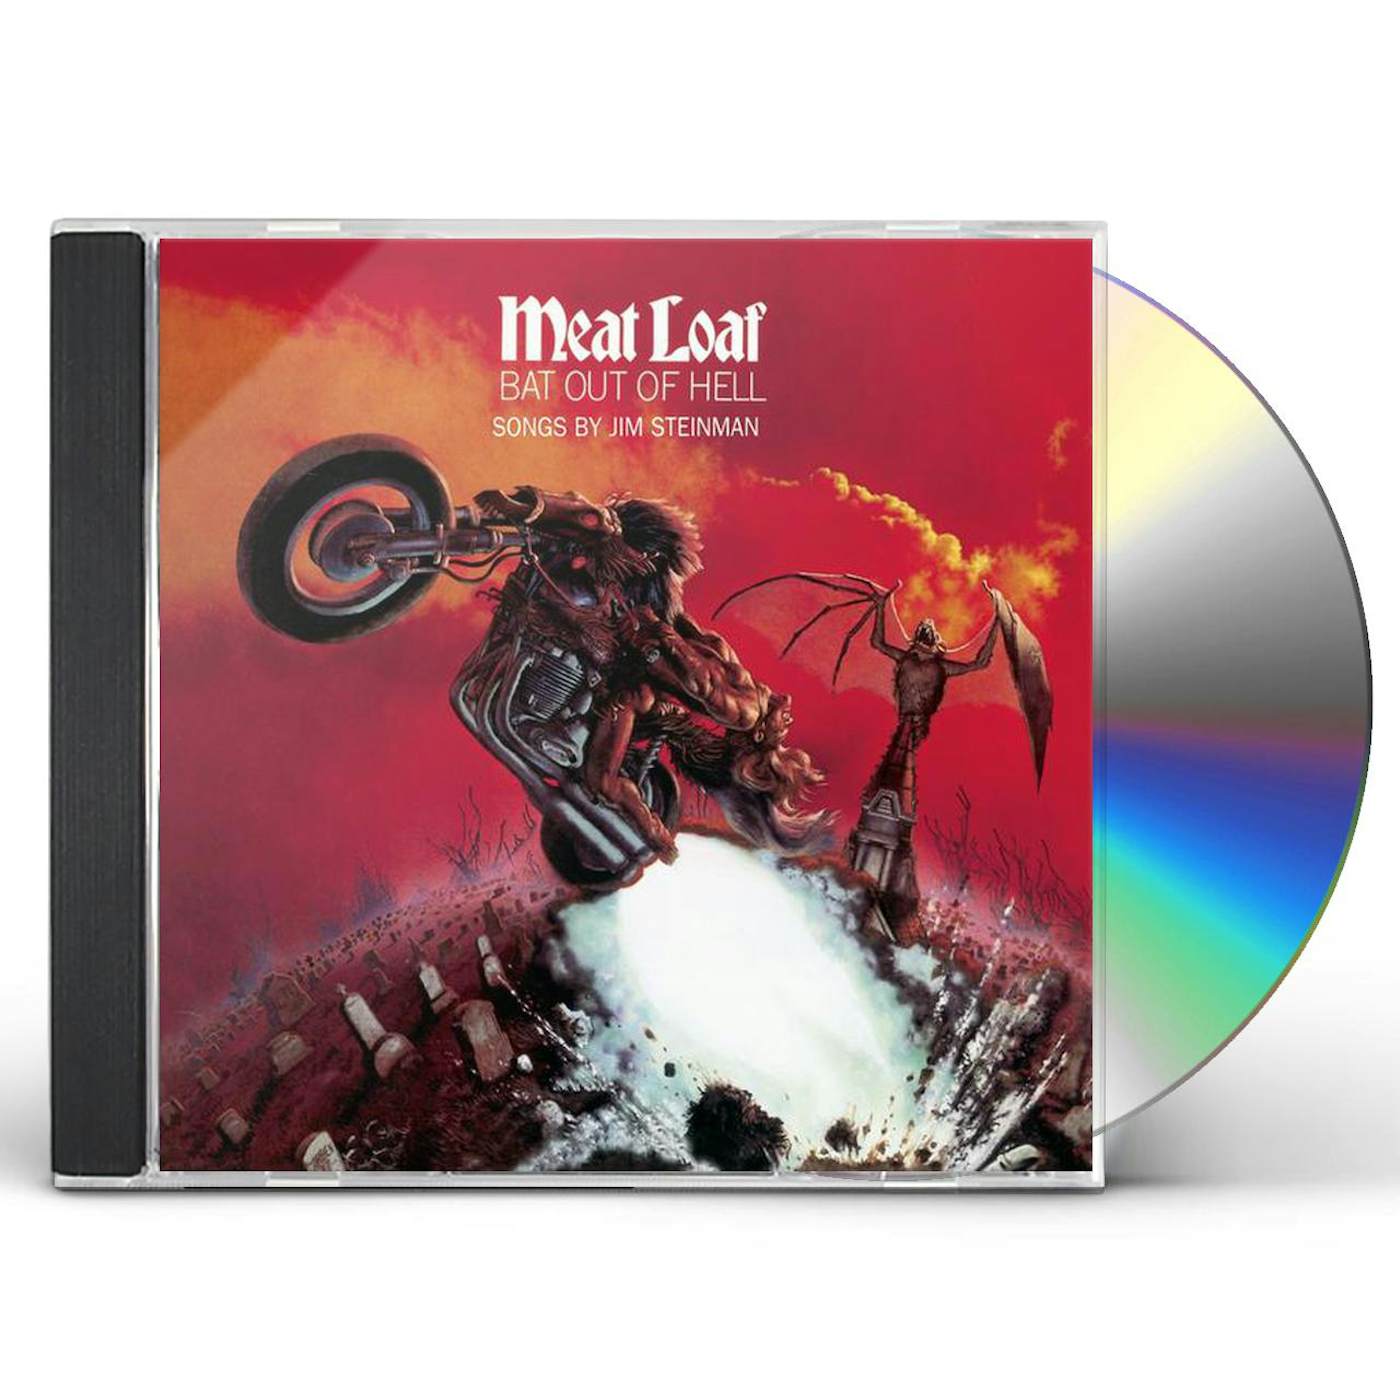 Meat Loaf BAT OUT OF HELL CD